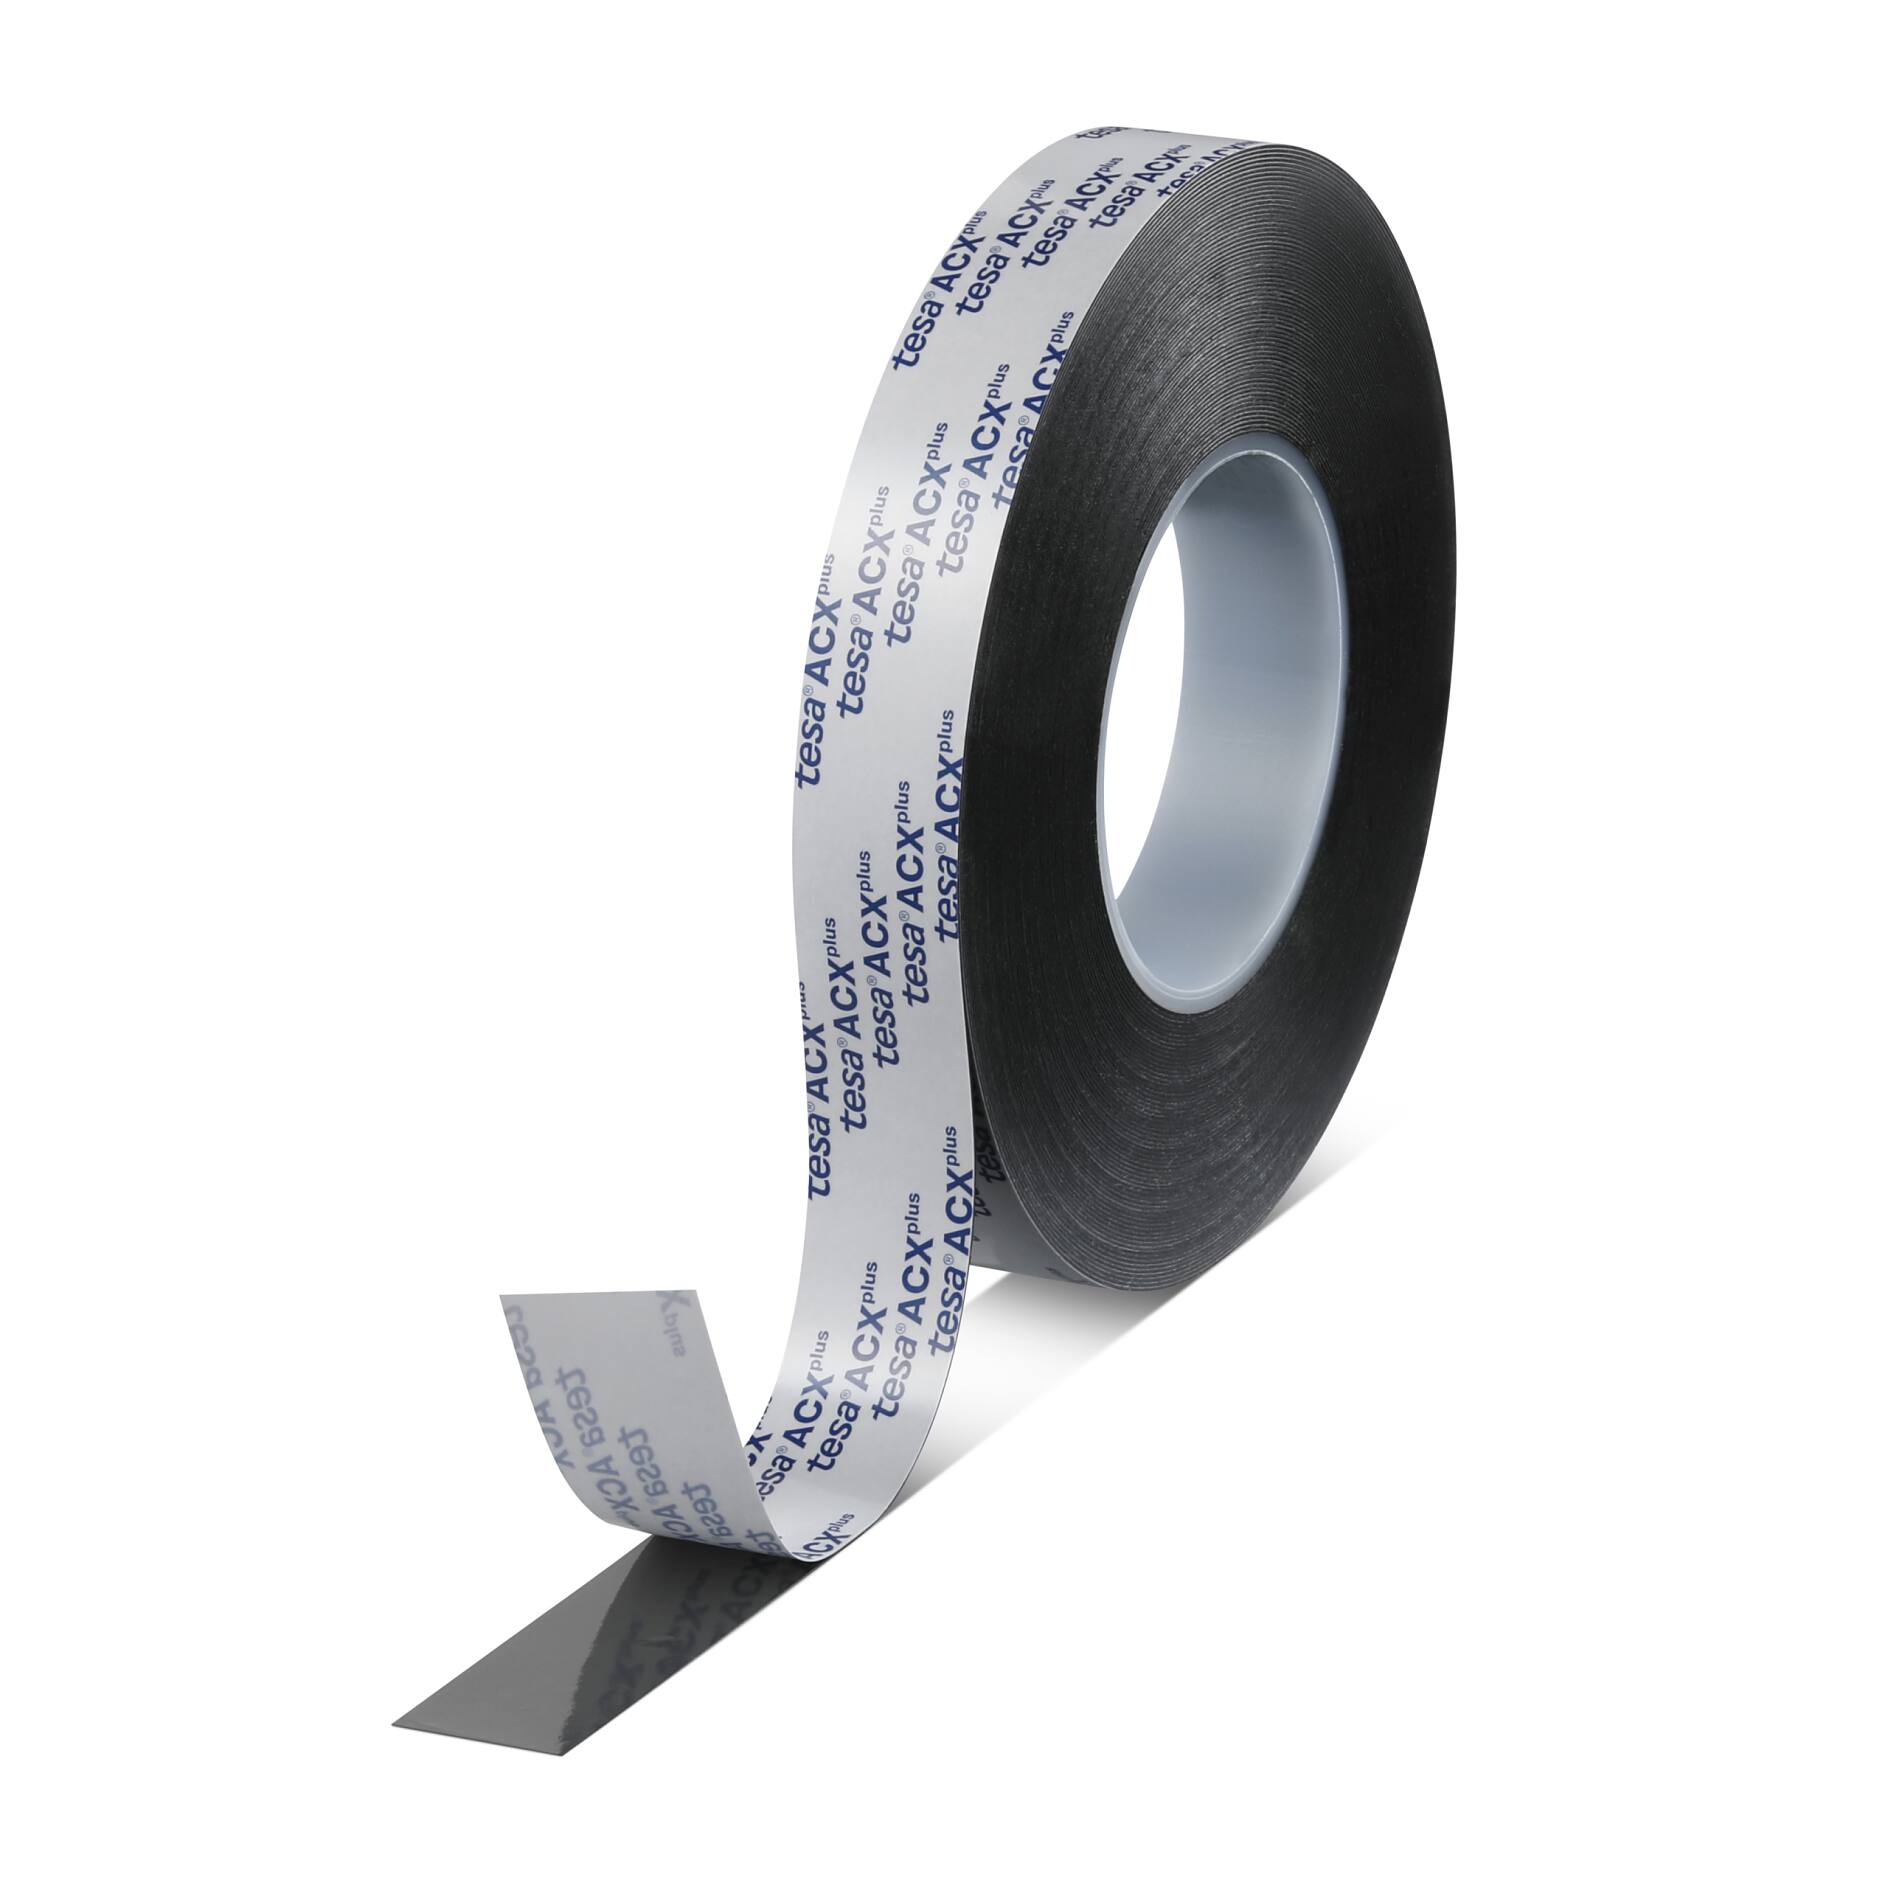 Tesa 51970 Double sided thin tape with PP reinforcement - acrylic